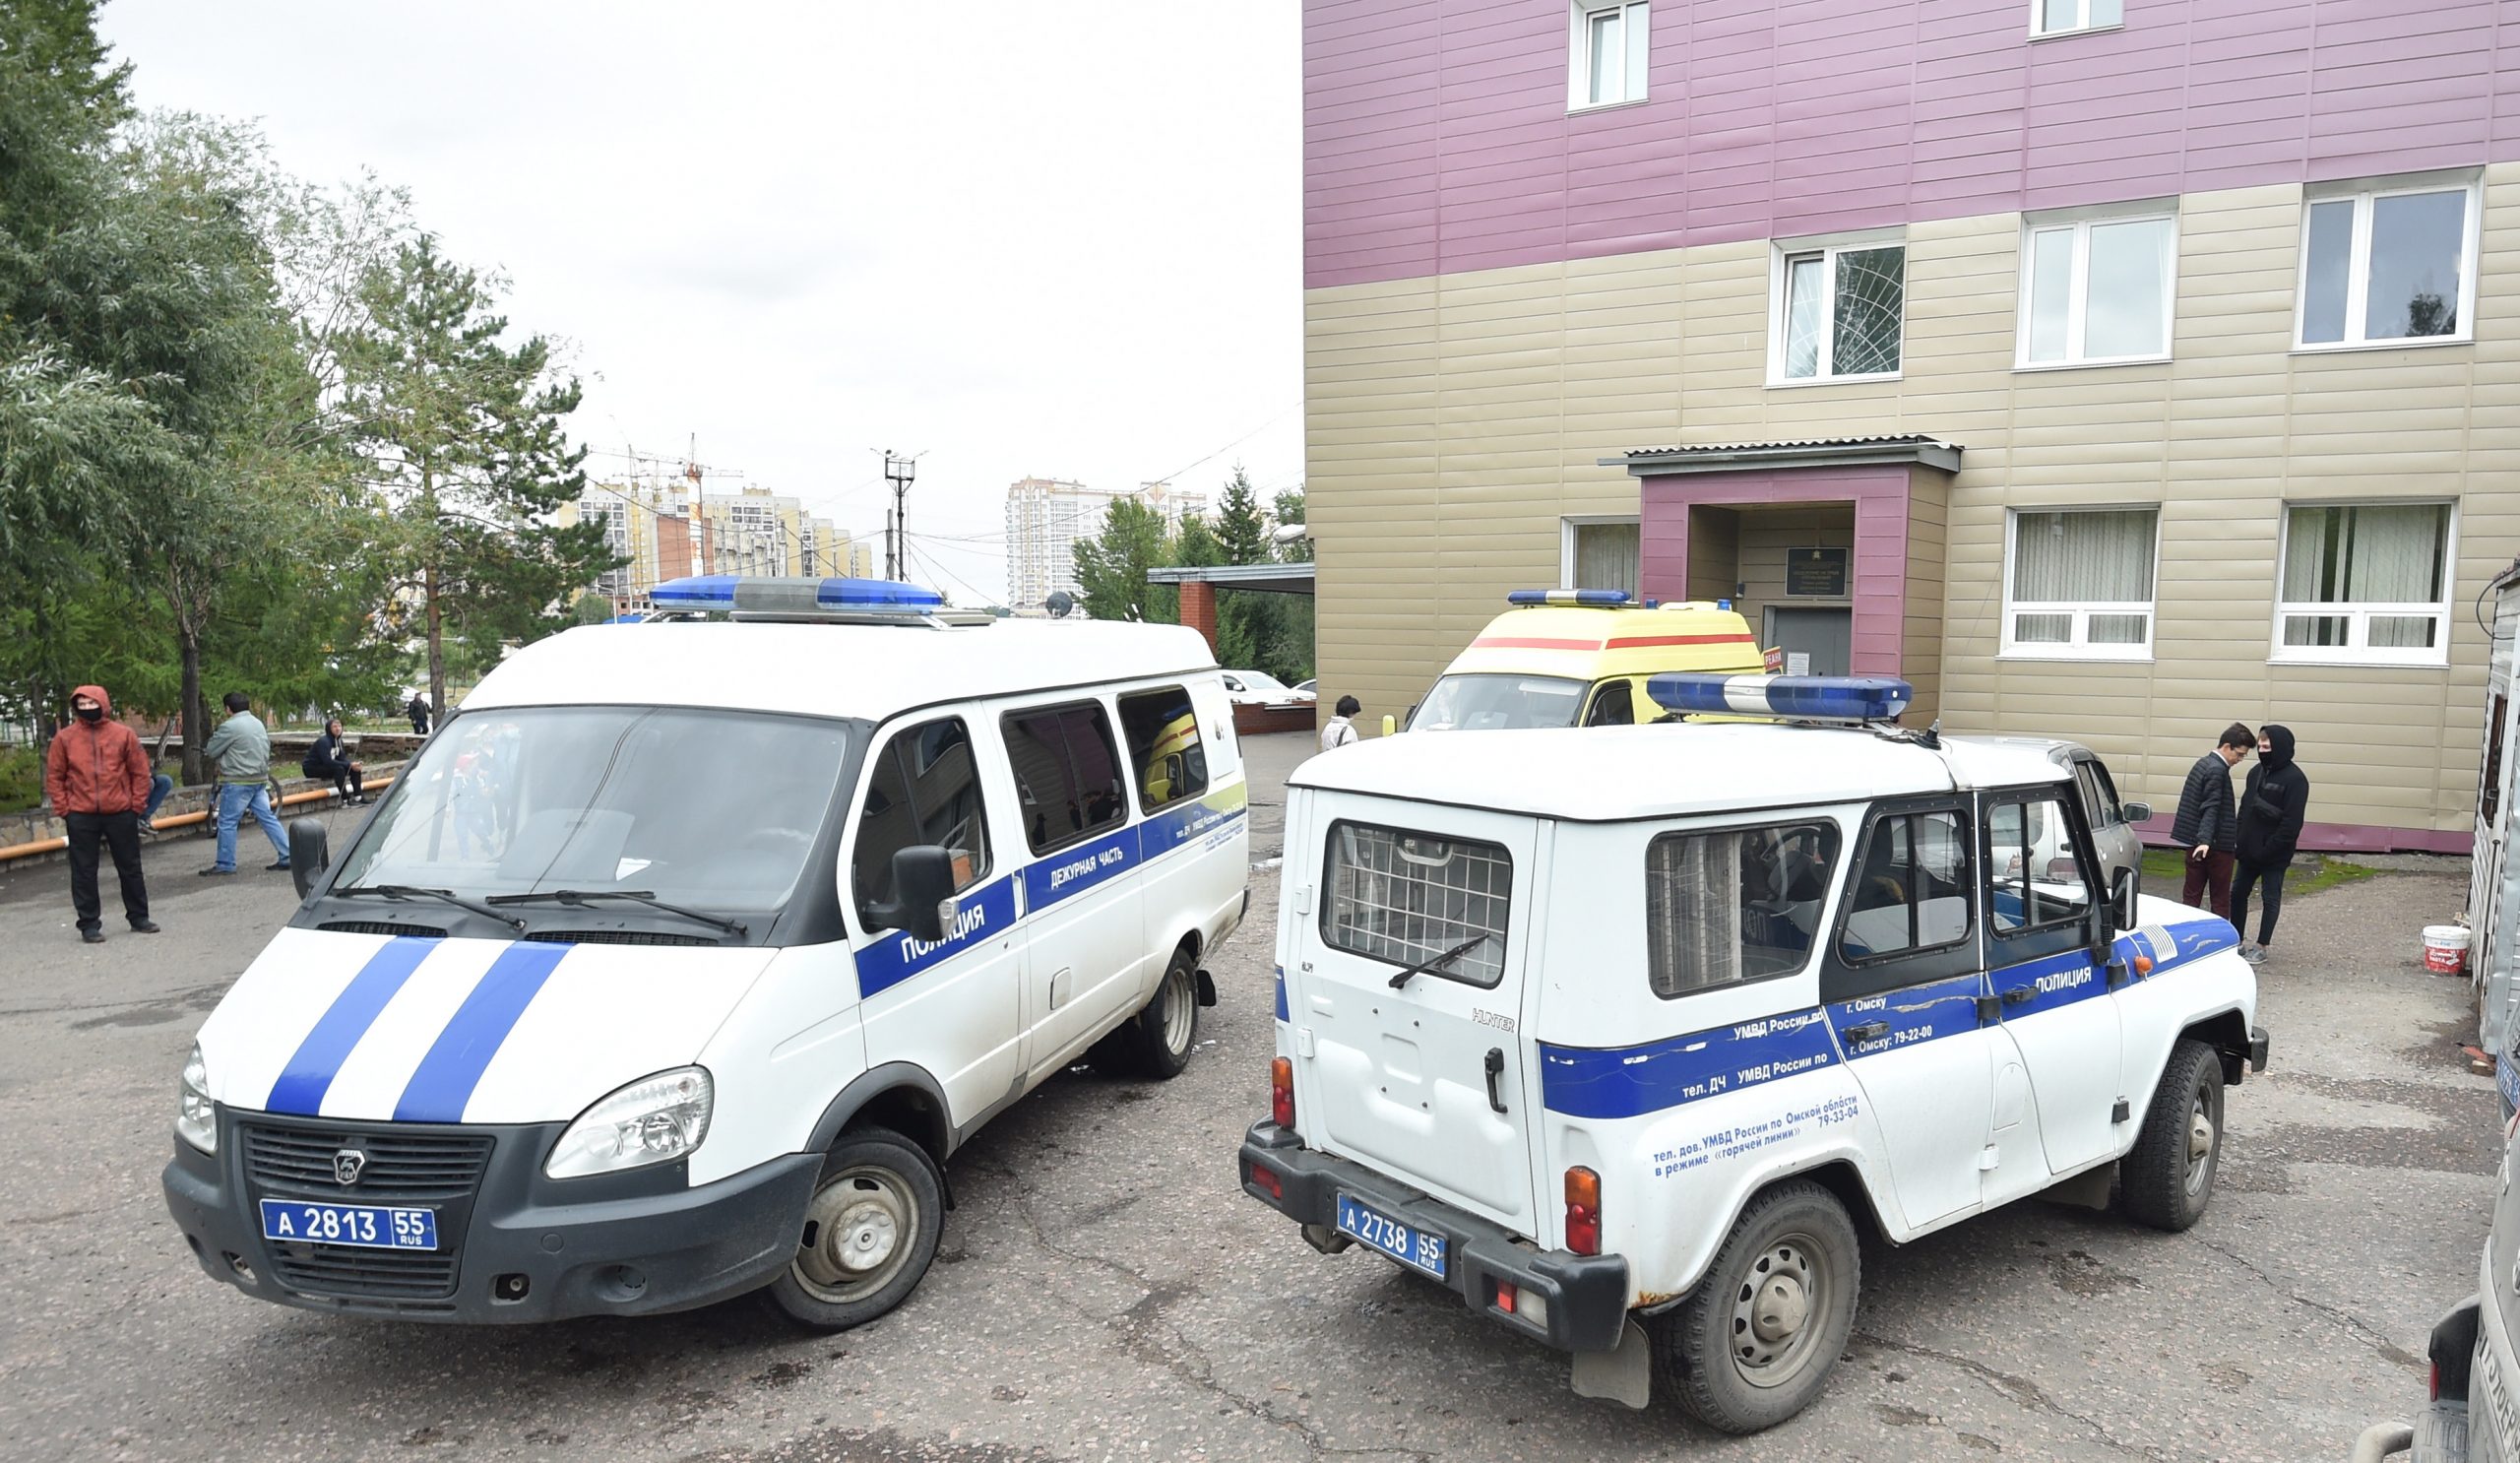 epa08614635 Police and ambulance vehicles stand in front of a hospital of emergency medical care-1, in Omsk, Russia, 20 August 2020. Russian opposition activist Alexei Navalny was placed in the hospital after he felt bad on board of a plane on his way from Tomsk to Moscow. The flight was interrupted and after landing in Omsk, Navalny was admitted to the hospital with the suspicion of a toxic poisoning.  EPA/MAXIM KARLAYEV